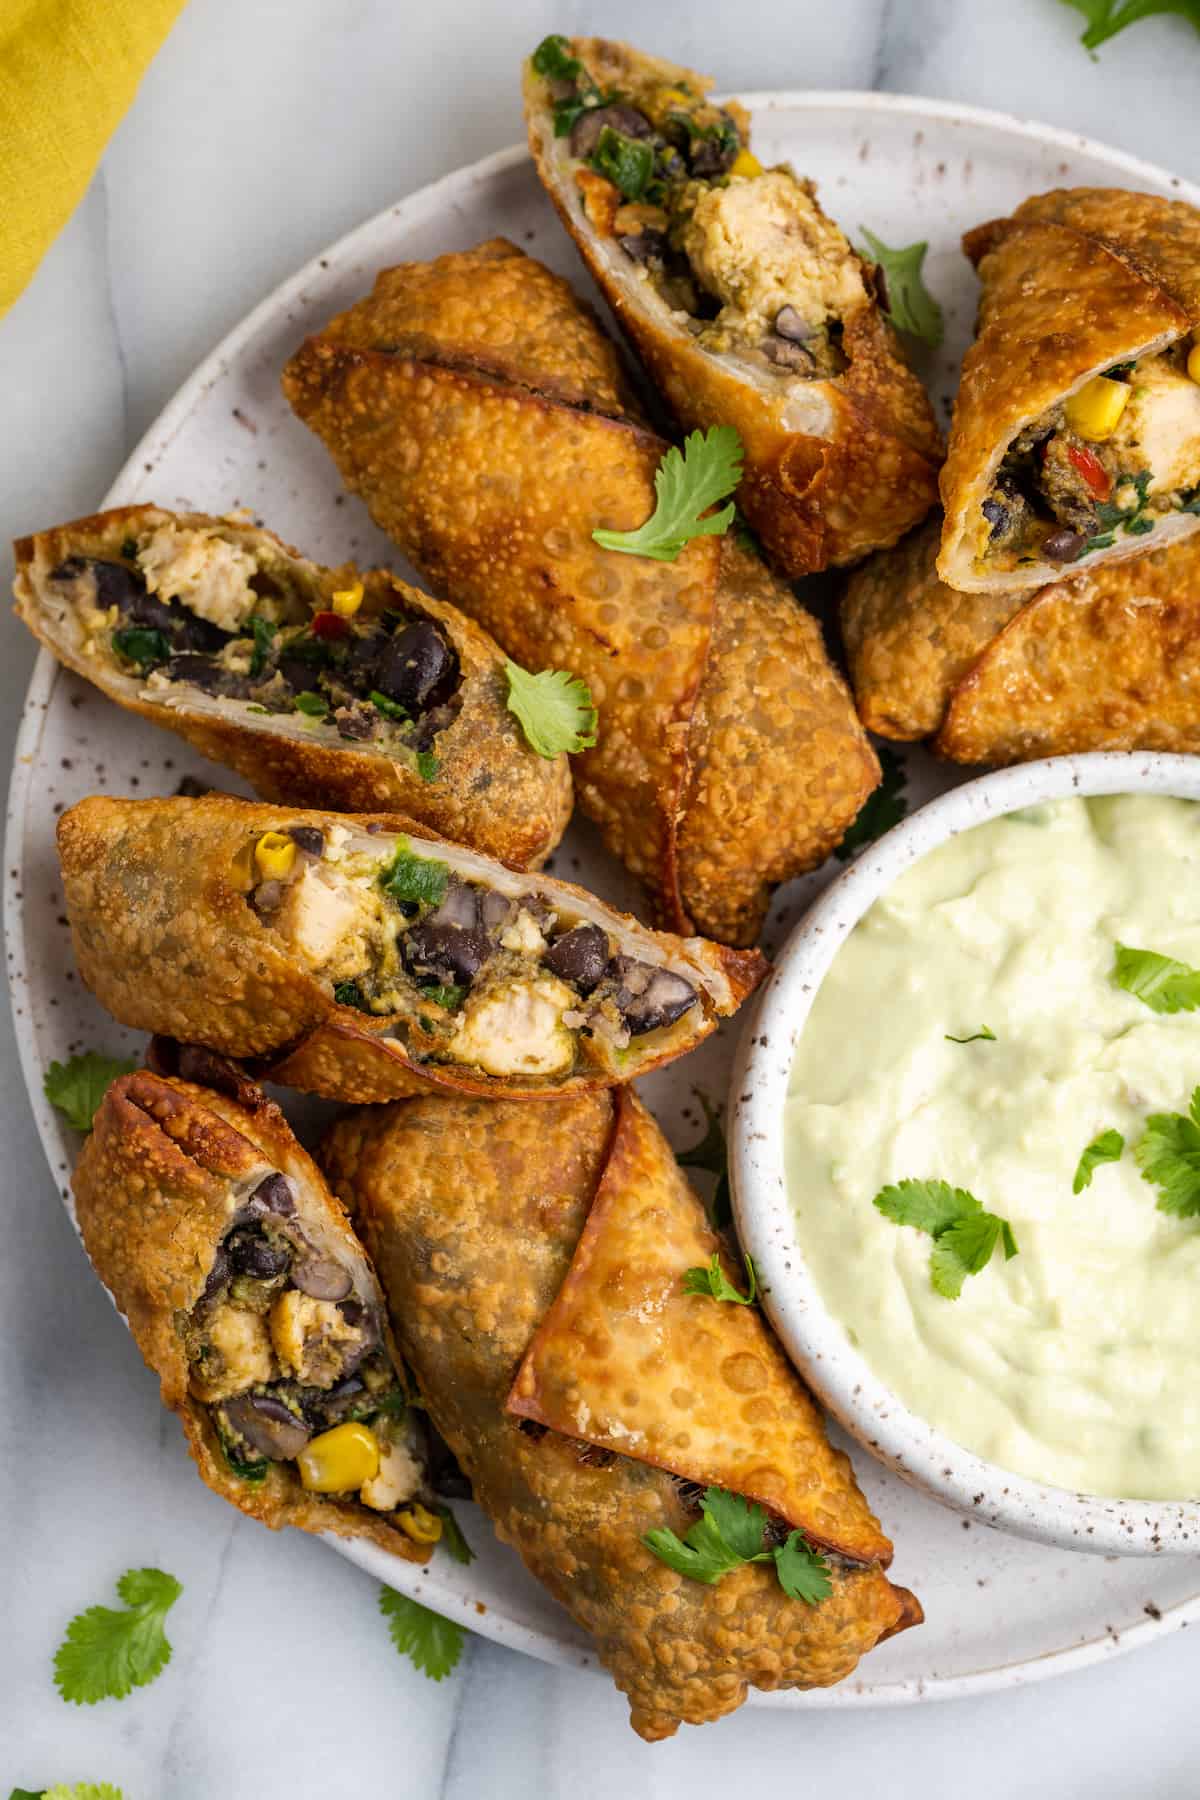 Overhead view of vegan southwest egg rolls on serving plate, with some cut open to show filling